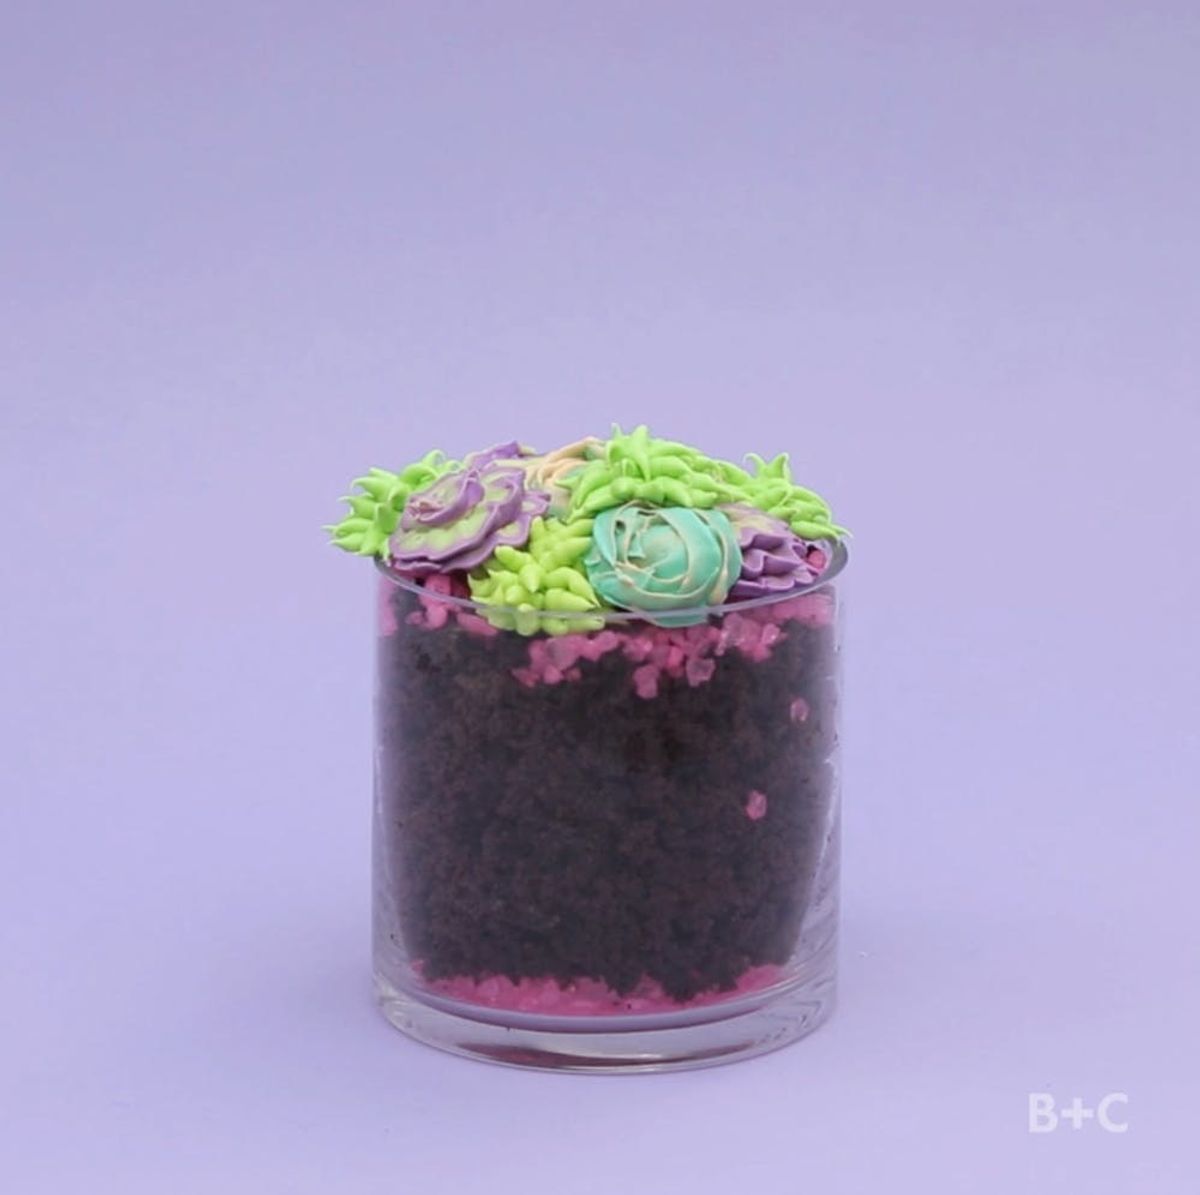 How to Make Succulents With Frosting